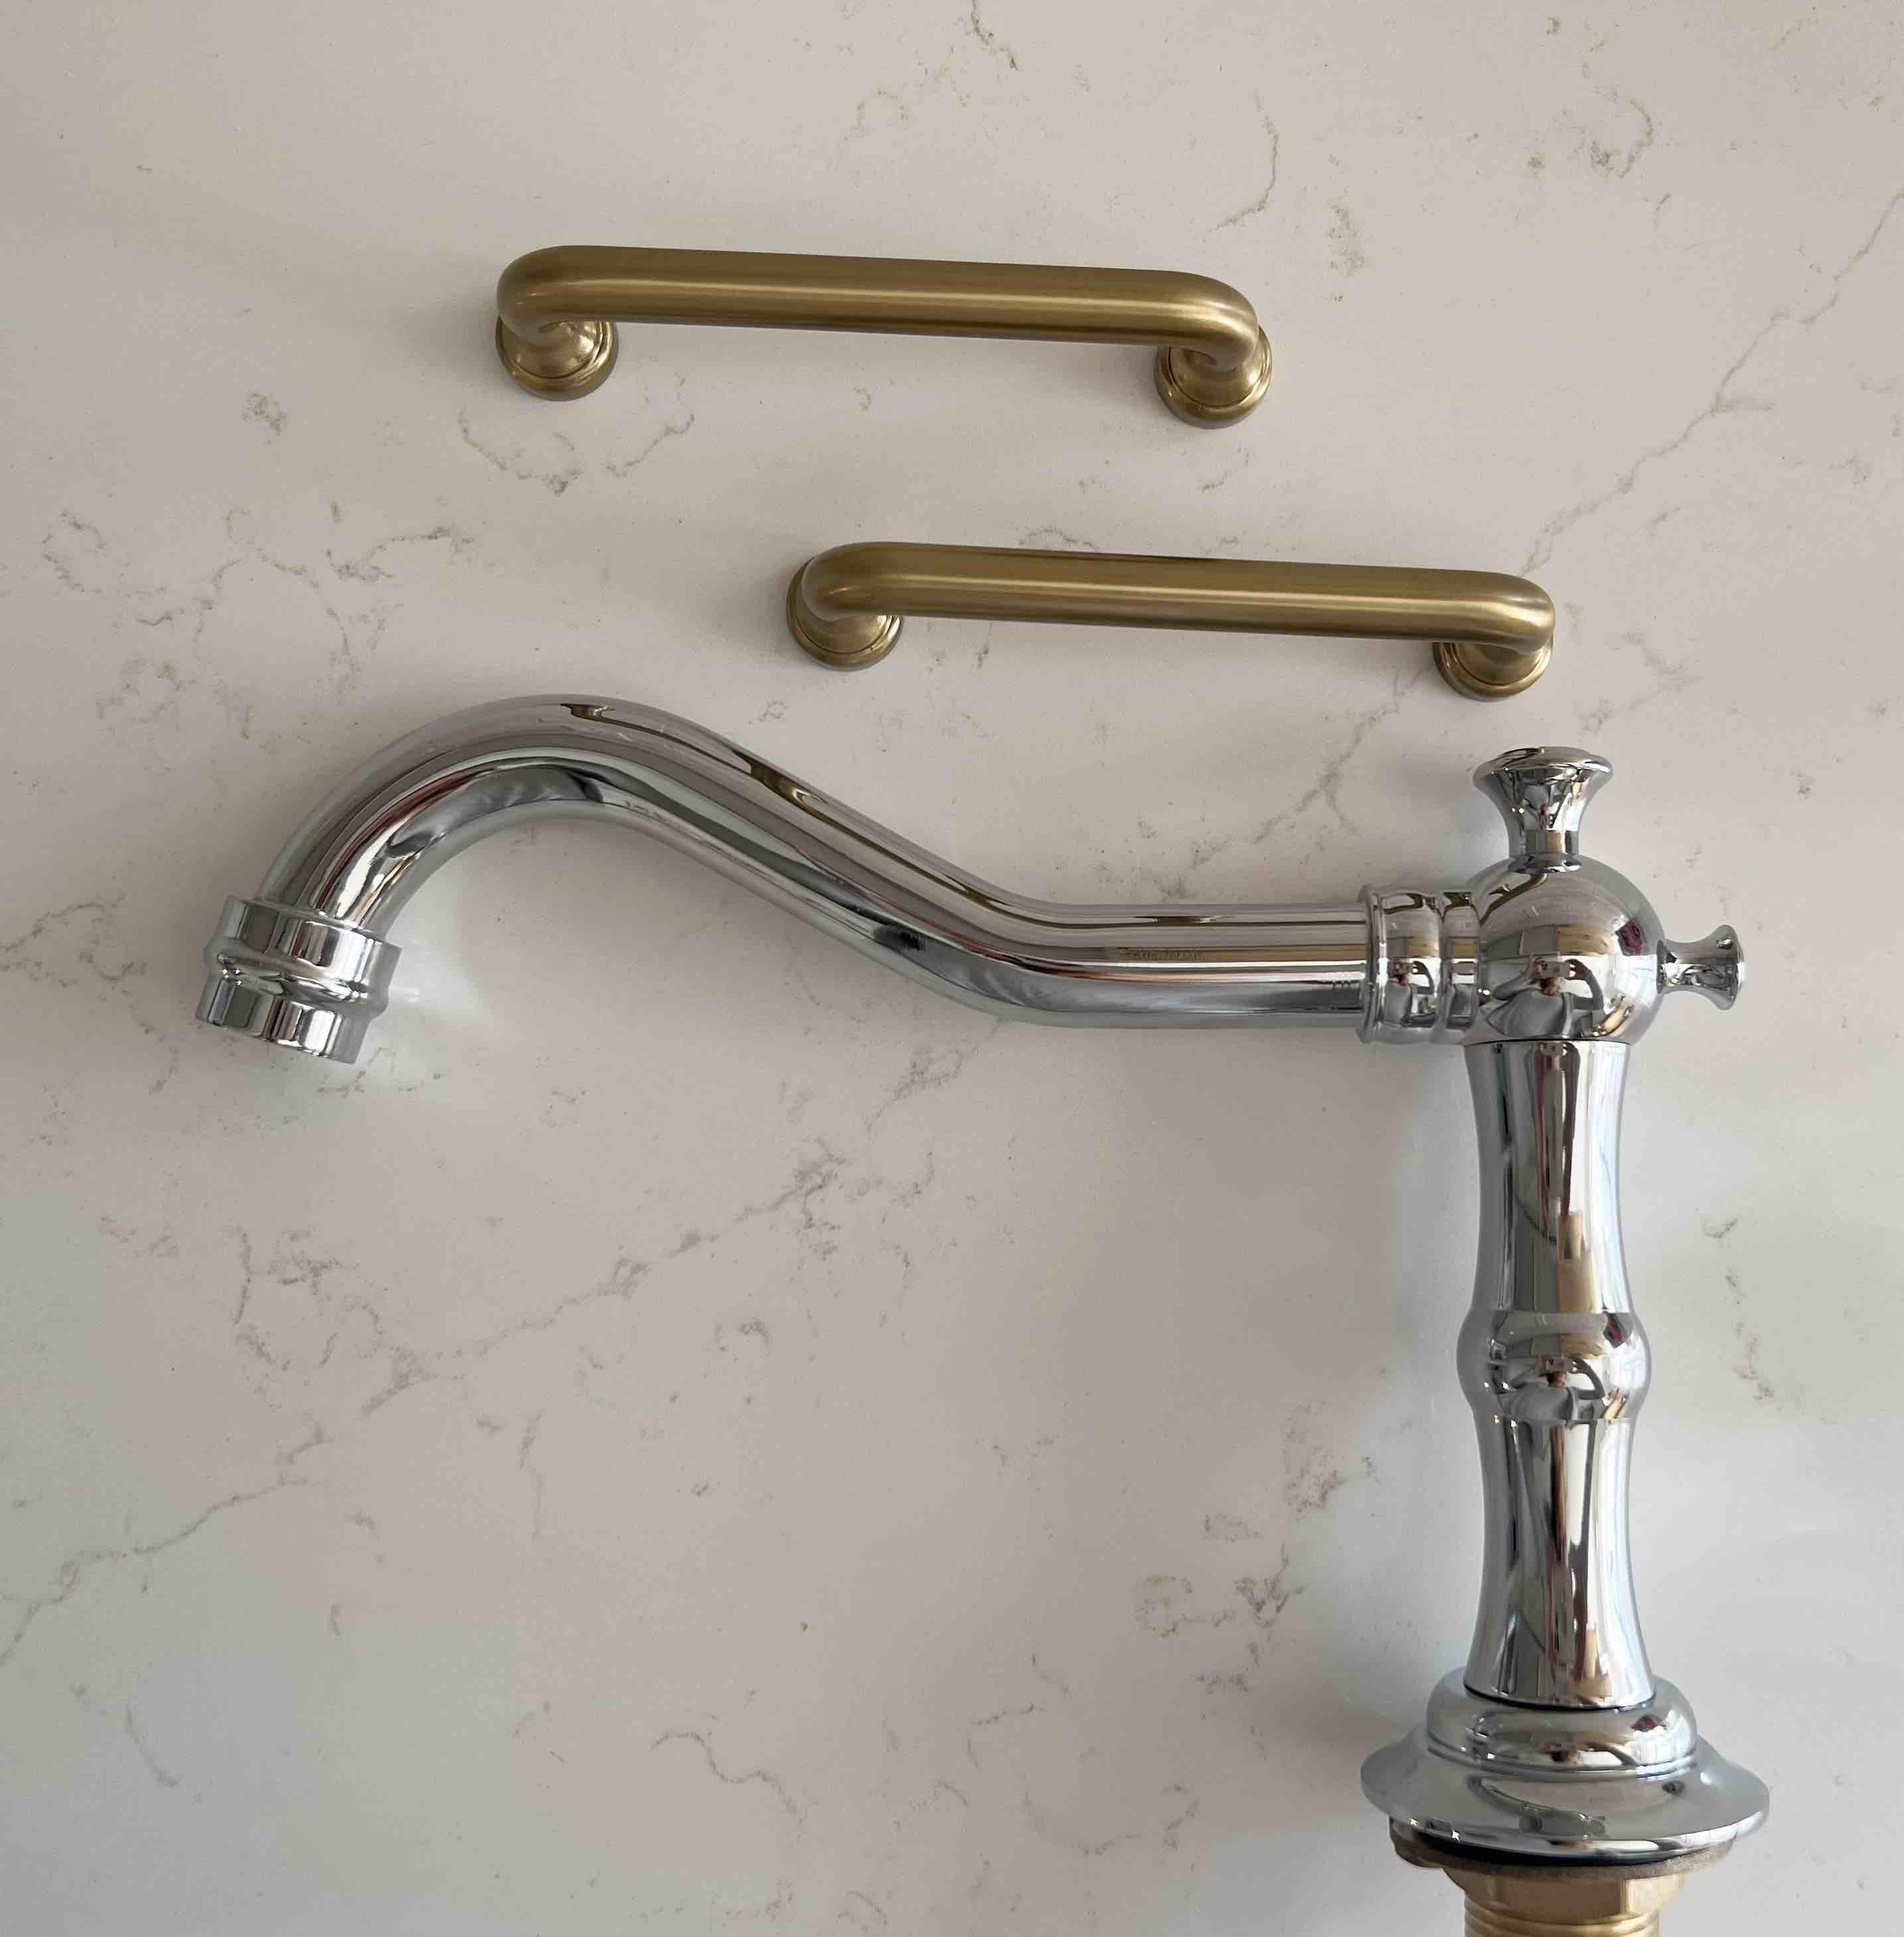 Antique brass cabinet pull hardware on a marble counter with shiny polished chrome vintage heritage faucet